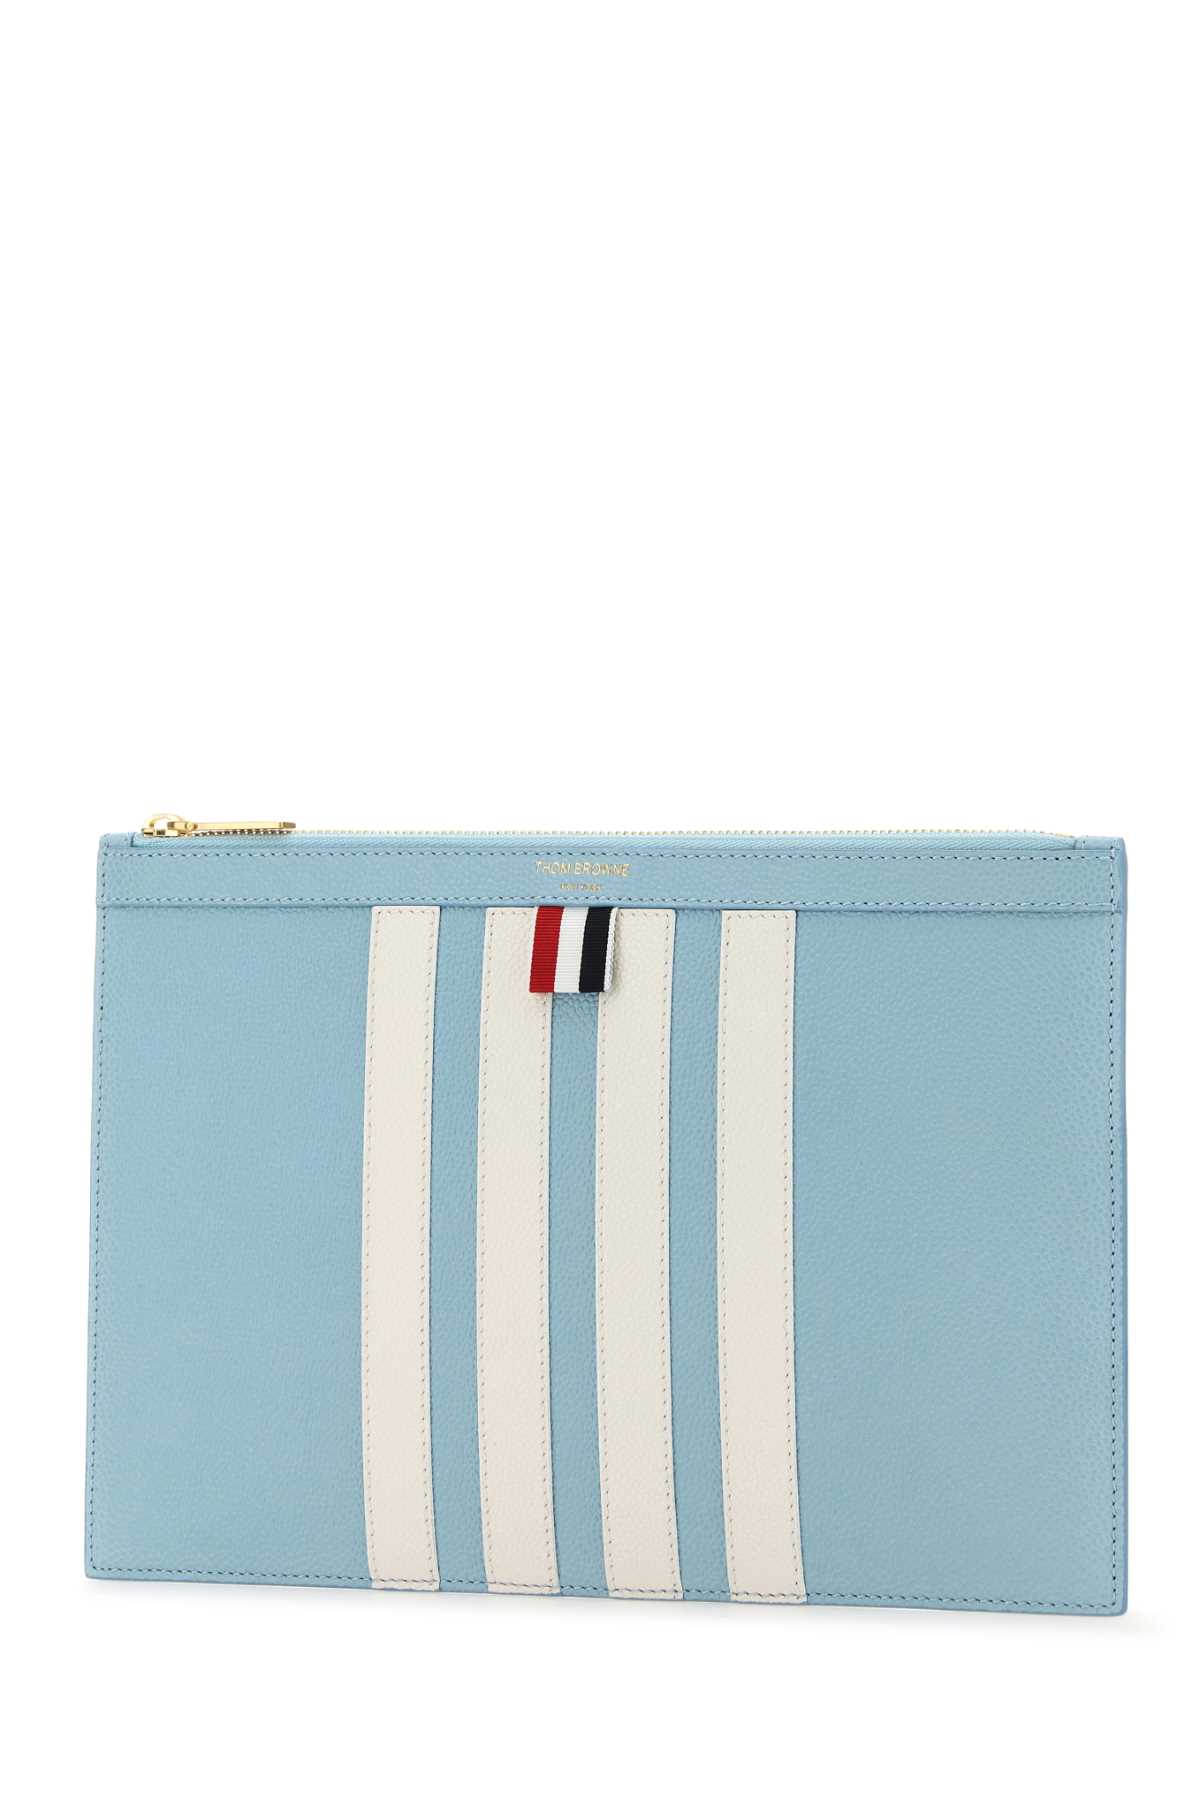 Shop Thom Browne Pastel Light Blue Leather Clutch In Blue1